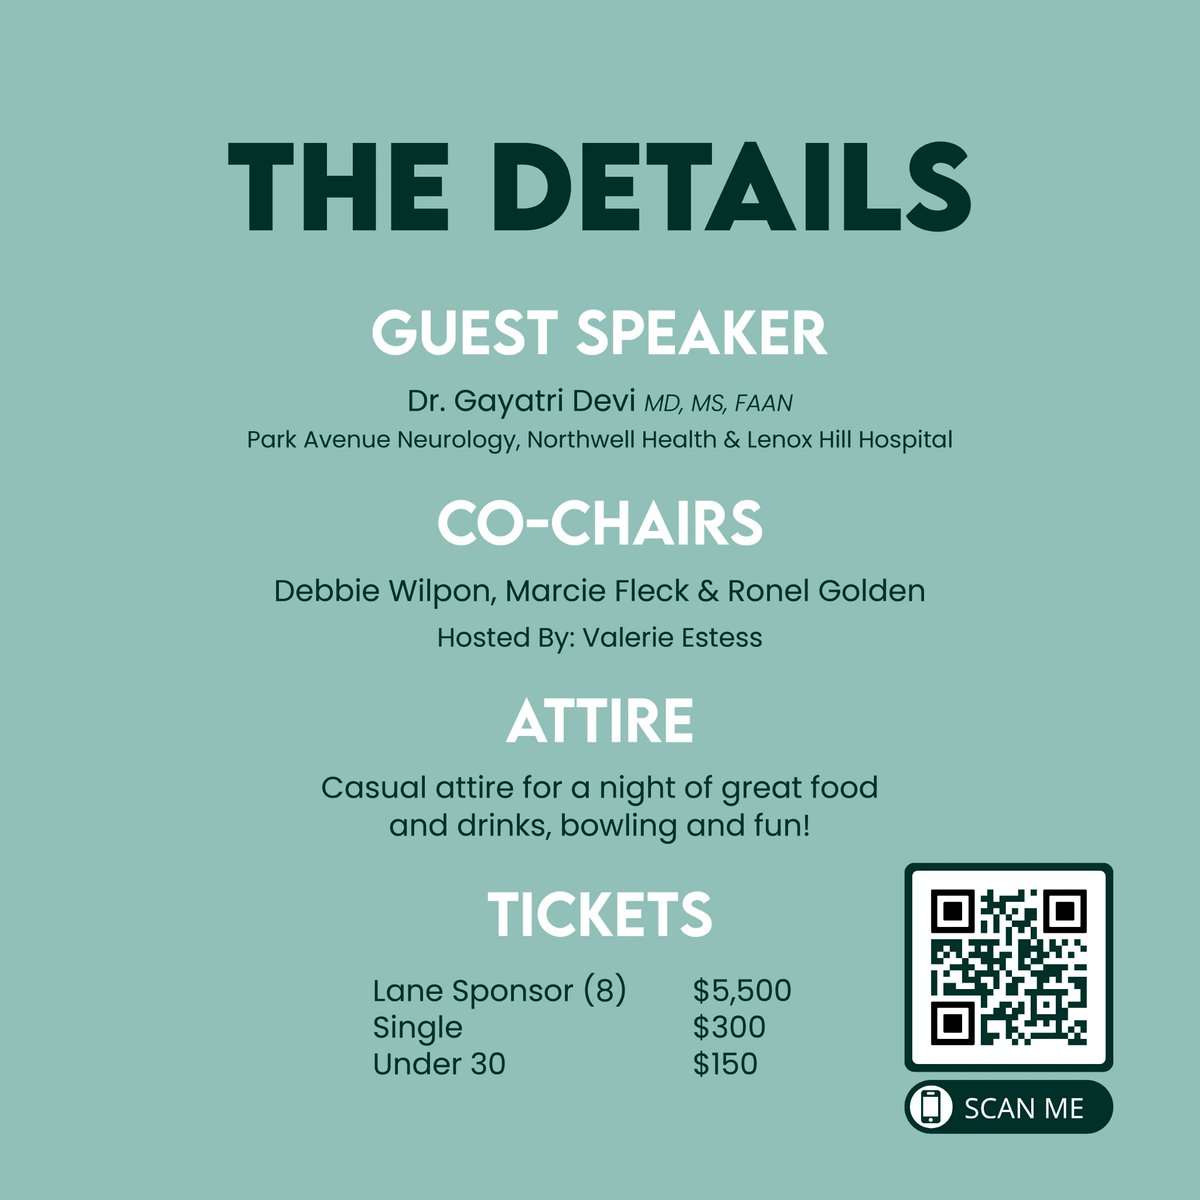 Women & The Brain: Stress on Your Brain is your chance to understand stress and release it! Guest expert, neurologist Dr. Gayatri Devi, leads a dynamic discussion, then we de-stress, with great food, drinks, bowling and fun! Get your ticket today: bit.ly/3TbG3bf